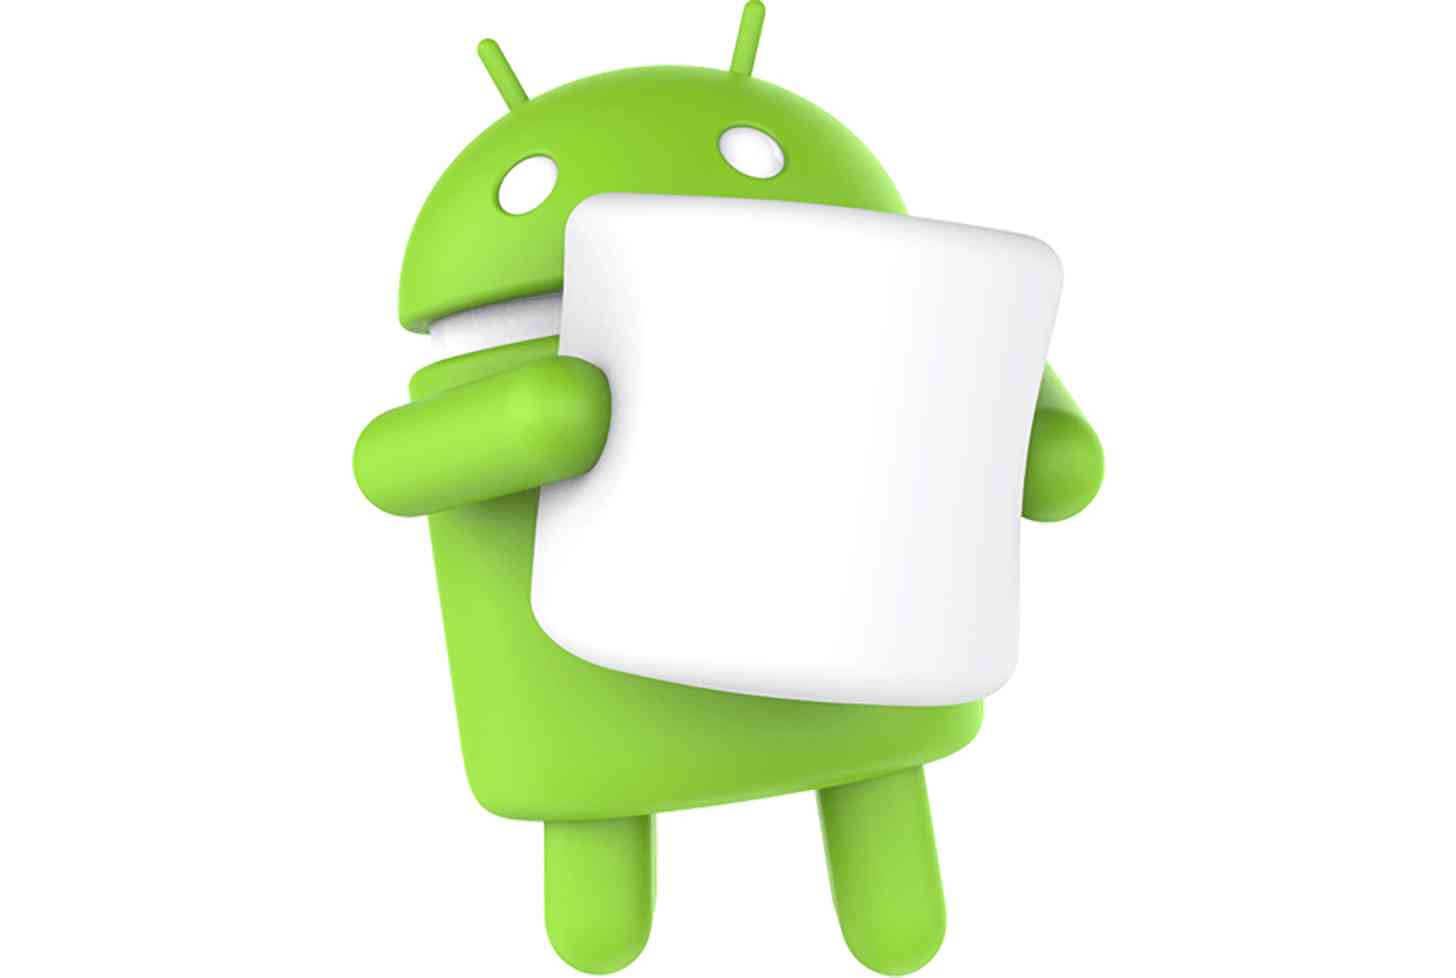 Android 6.0 Marshmallow large